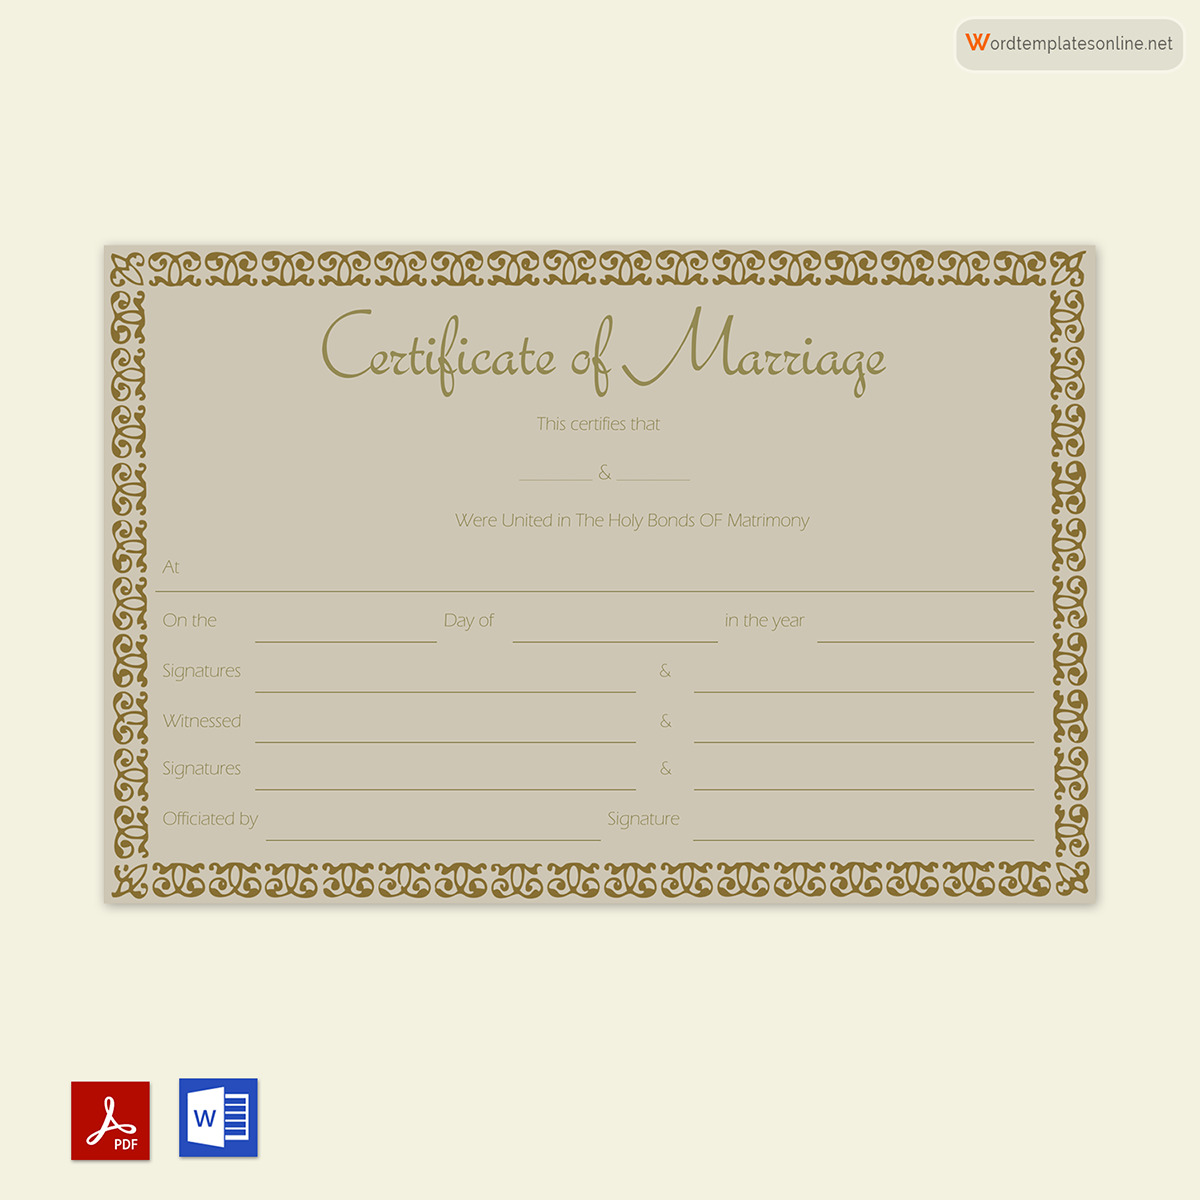 Official Marriage License Sample